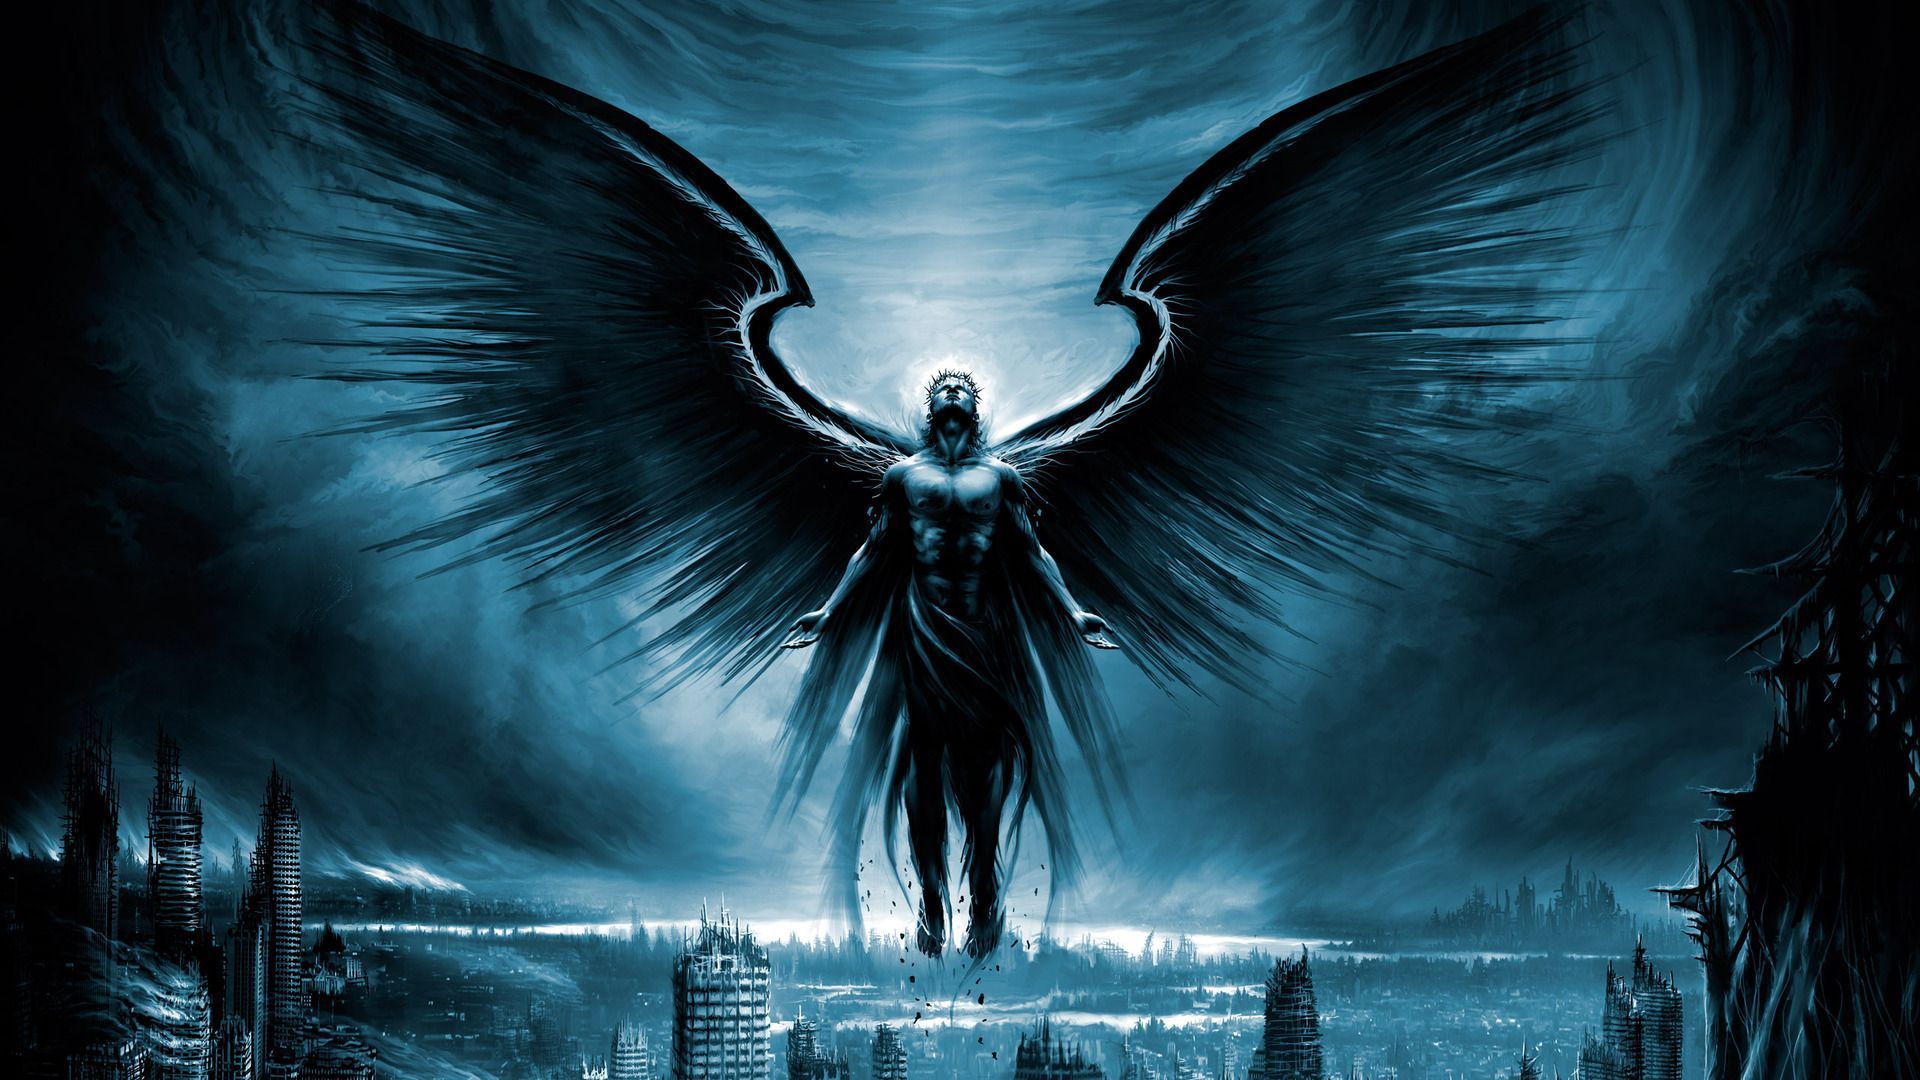 Archangel wings wallpaper the city the ruins wallpapers fantasy